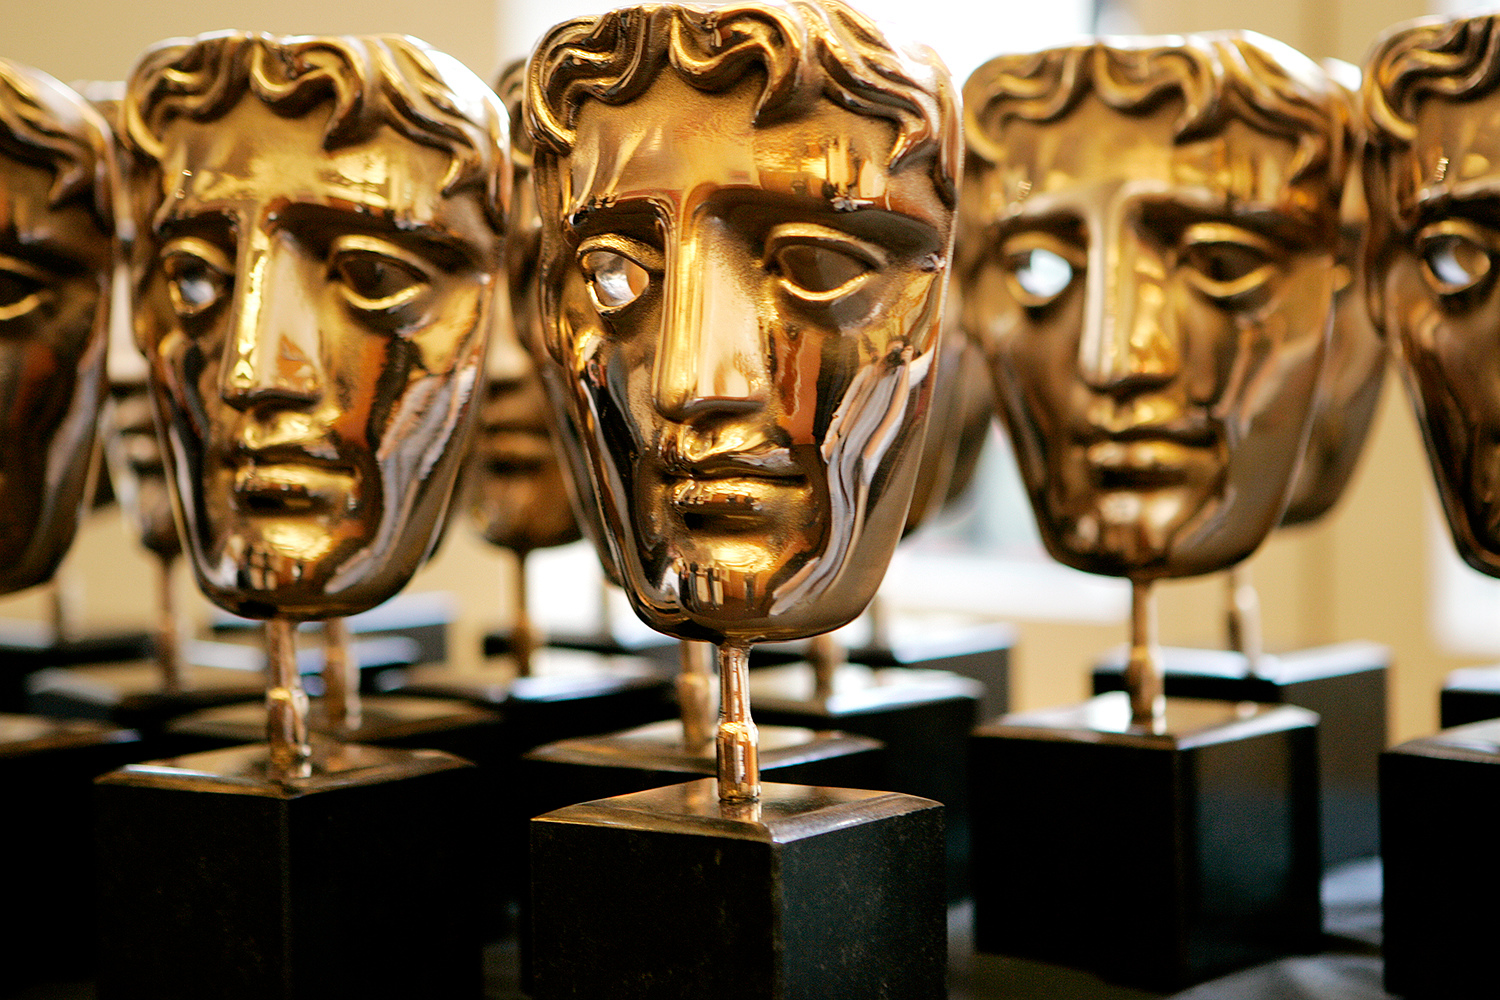 How You Can Watch BAFTA Awards 2019 On US TV